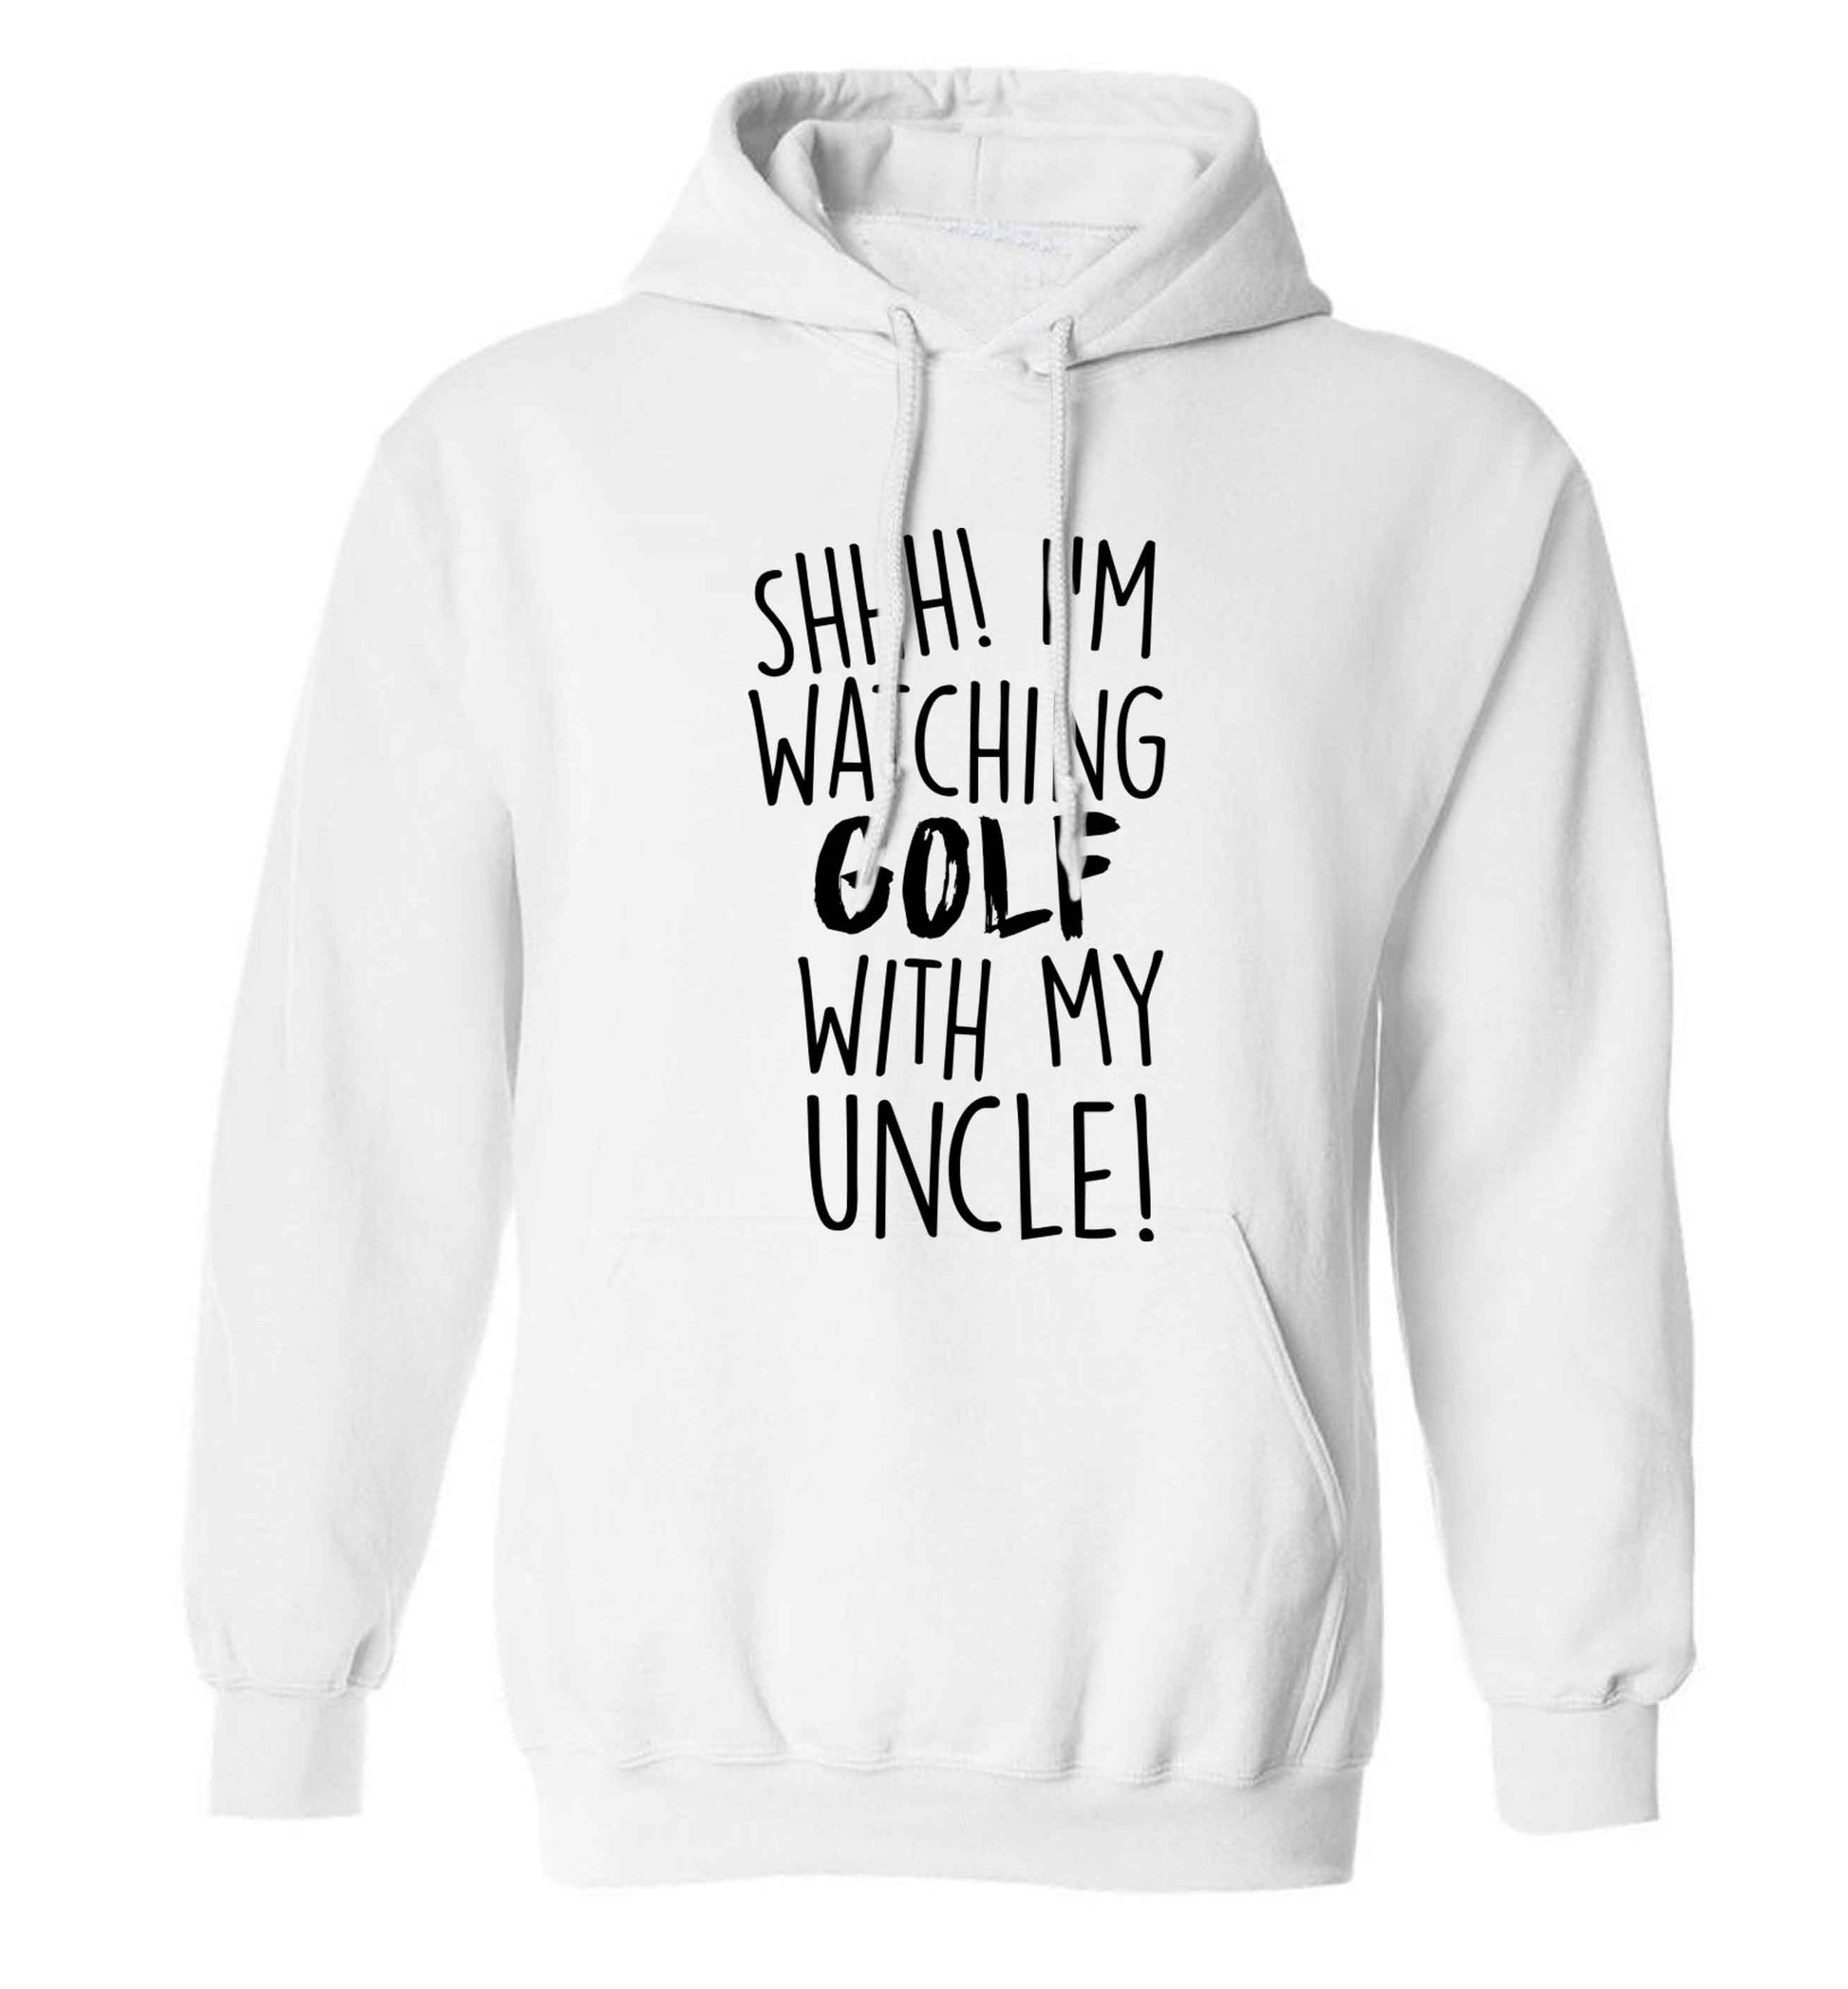 Shh I'm watching golf with my uncle adults unisex white hoodie 2XL